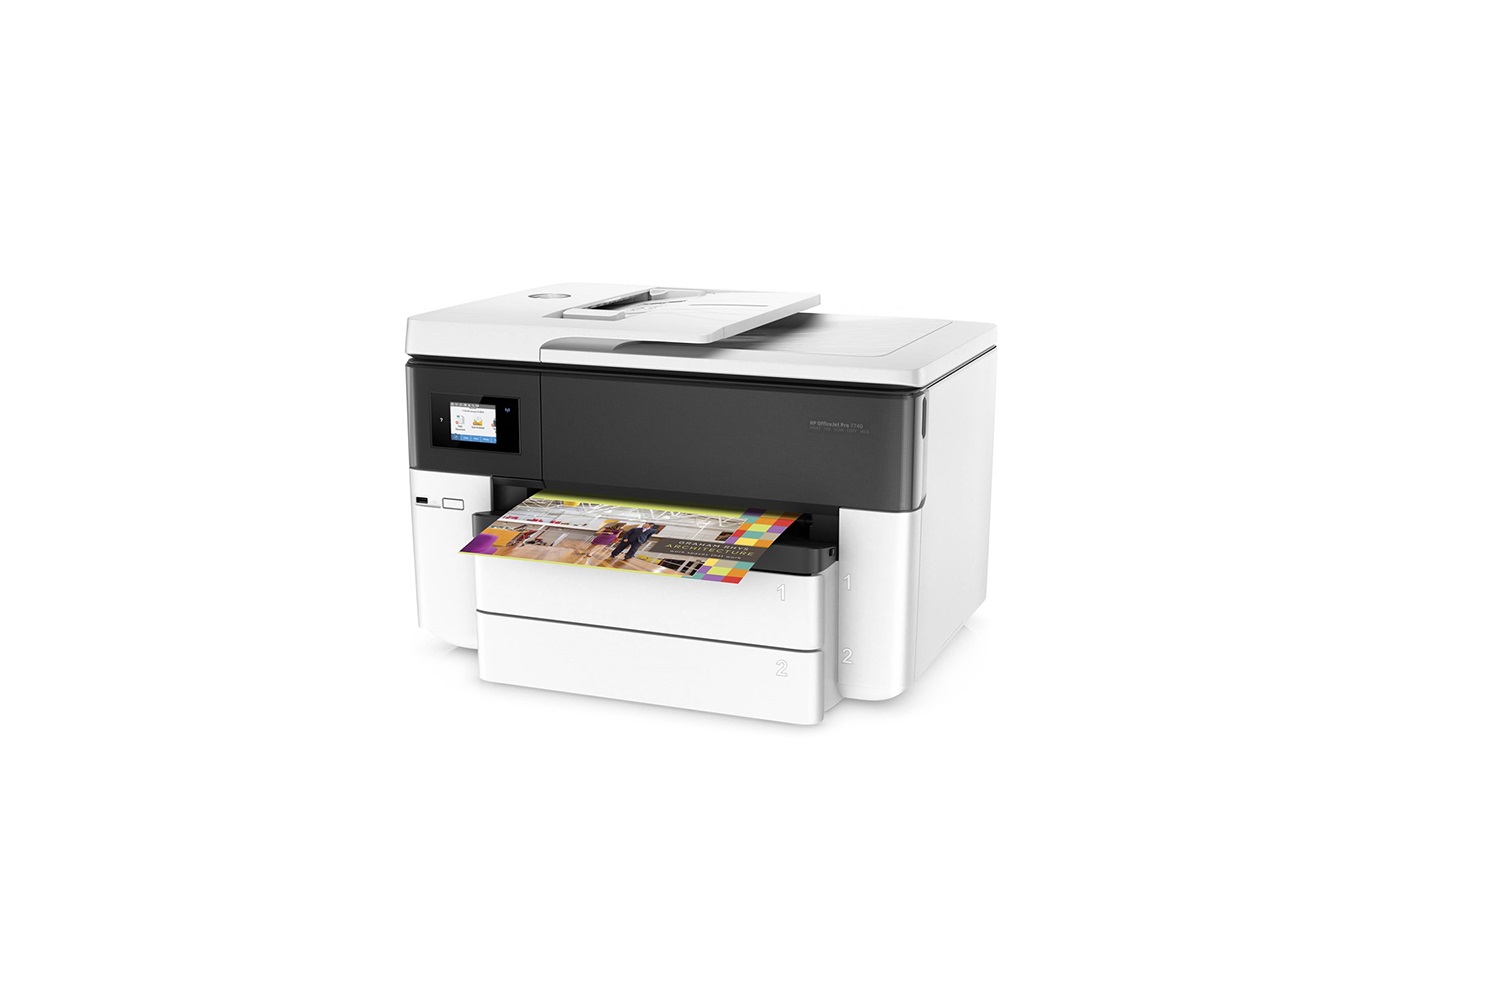 HP OfficeJet Pro 7740 Wide Format All-in-One Printer (Refurbished)